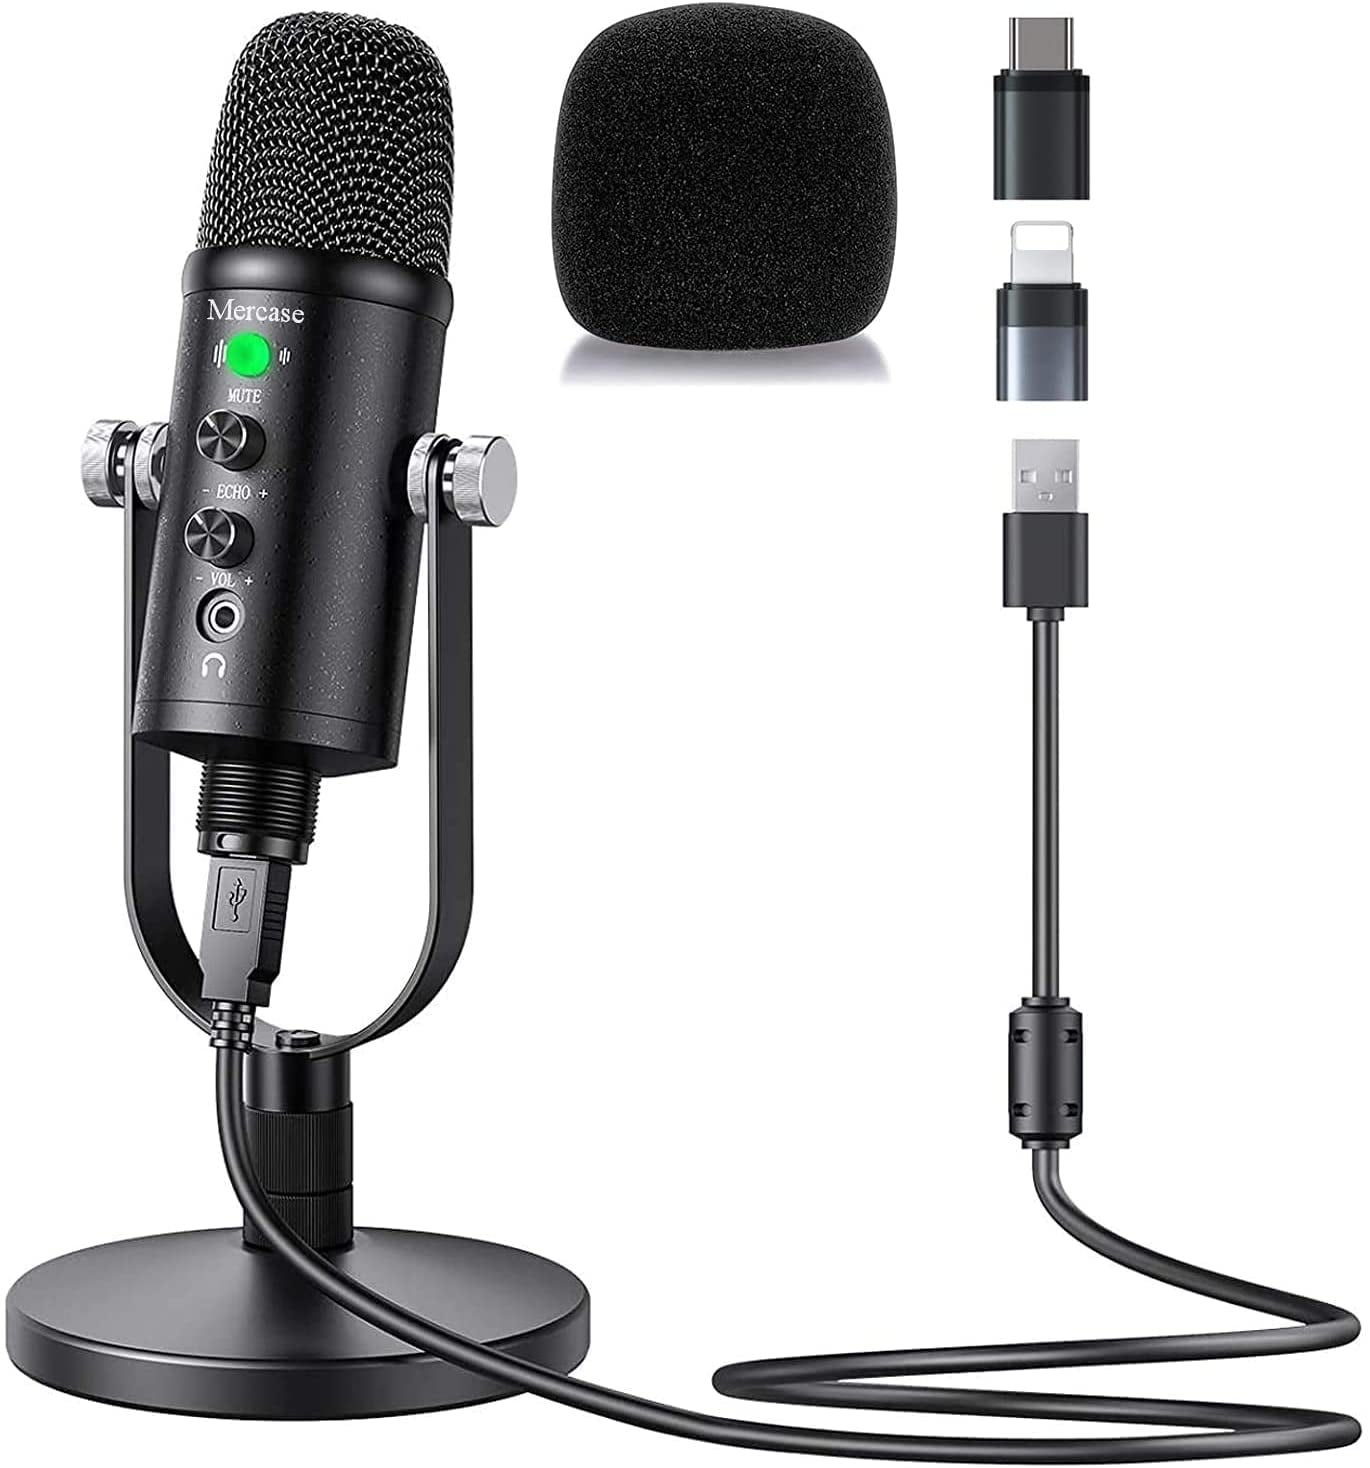 Mercase USB Condenser with Noise Cancelling and Reverb Mic for Recording/Podcasting/Streaming/Gaming, Computer PC/MAC/Ps4/iPhone/iPad/Android Walmart.com